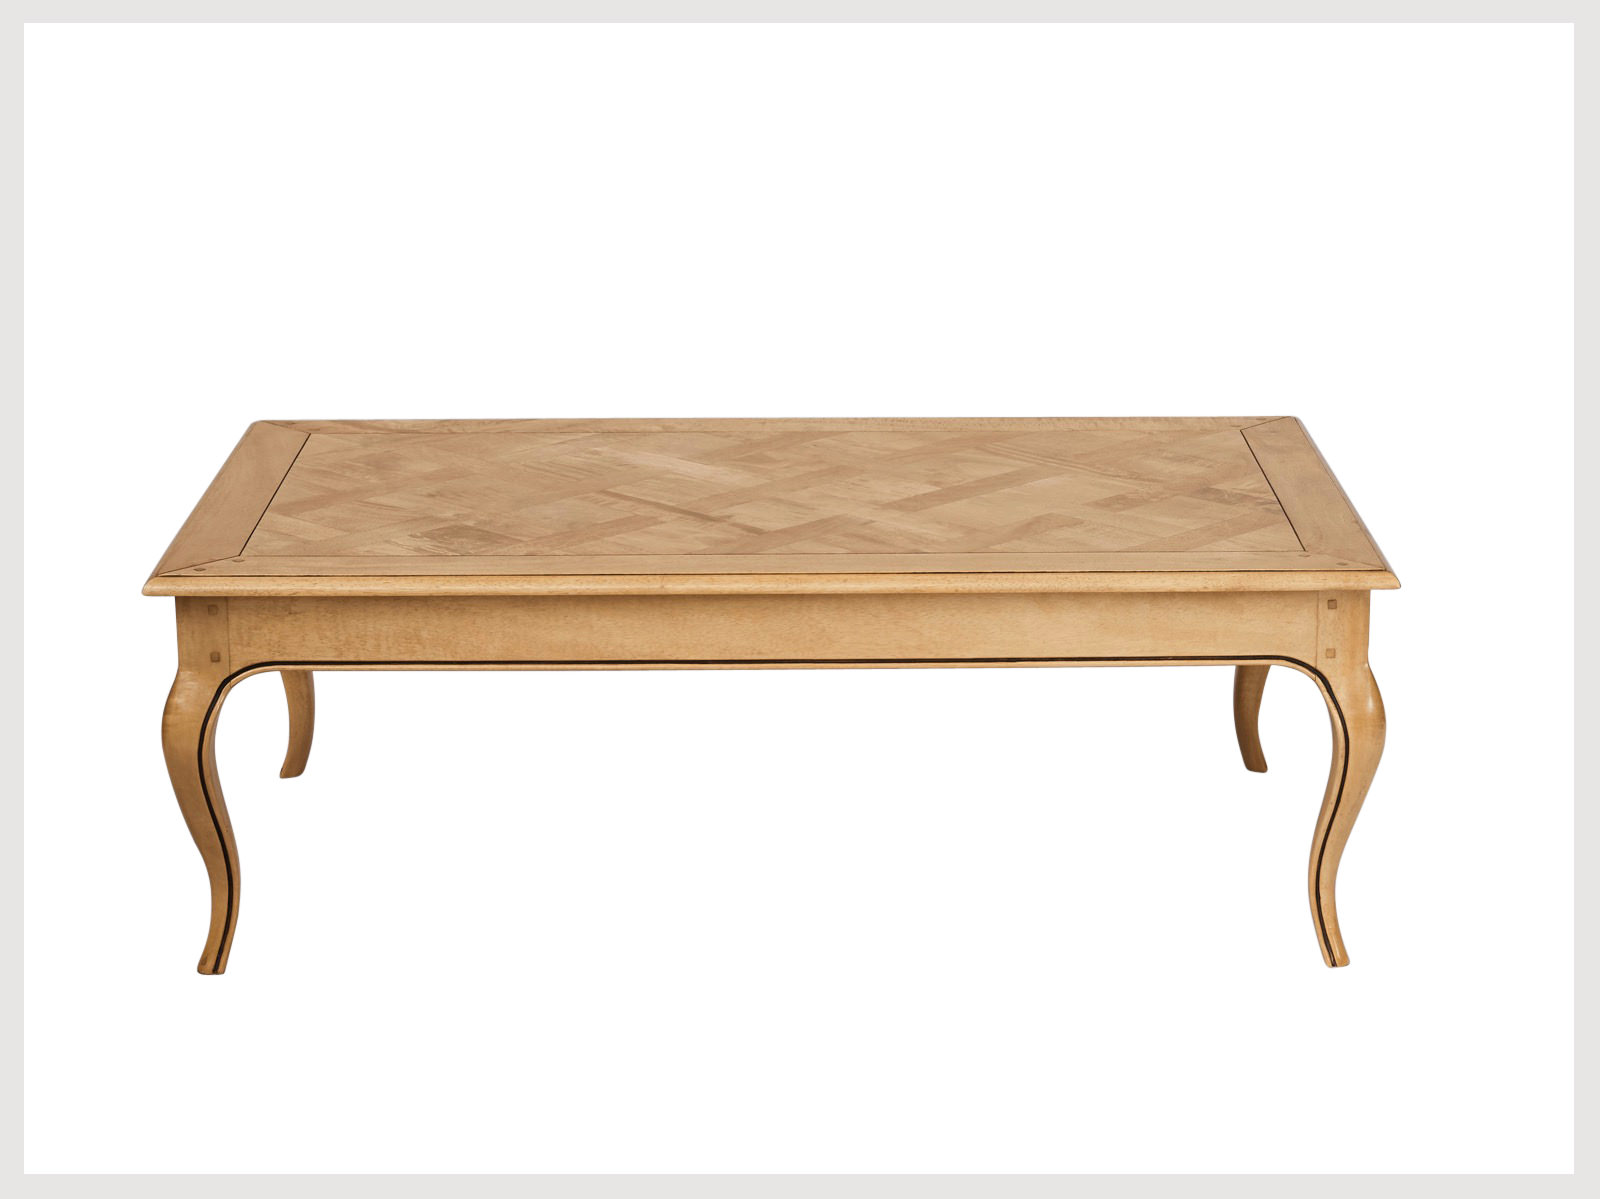 French Provincial Style Blonde Wood Coffee Table Lb9 French Furniture Sydney